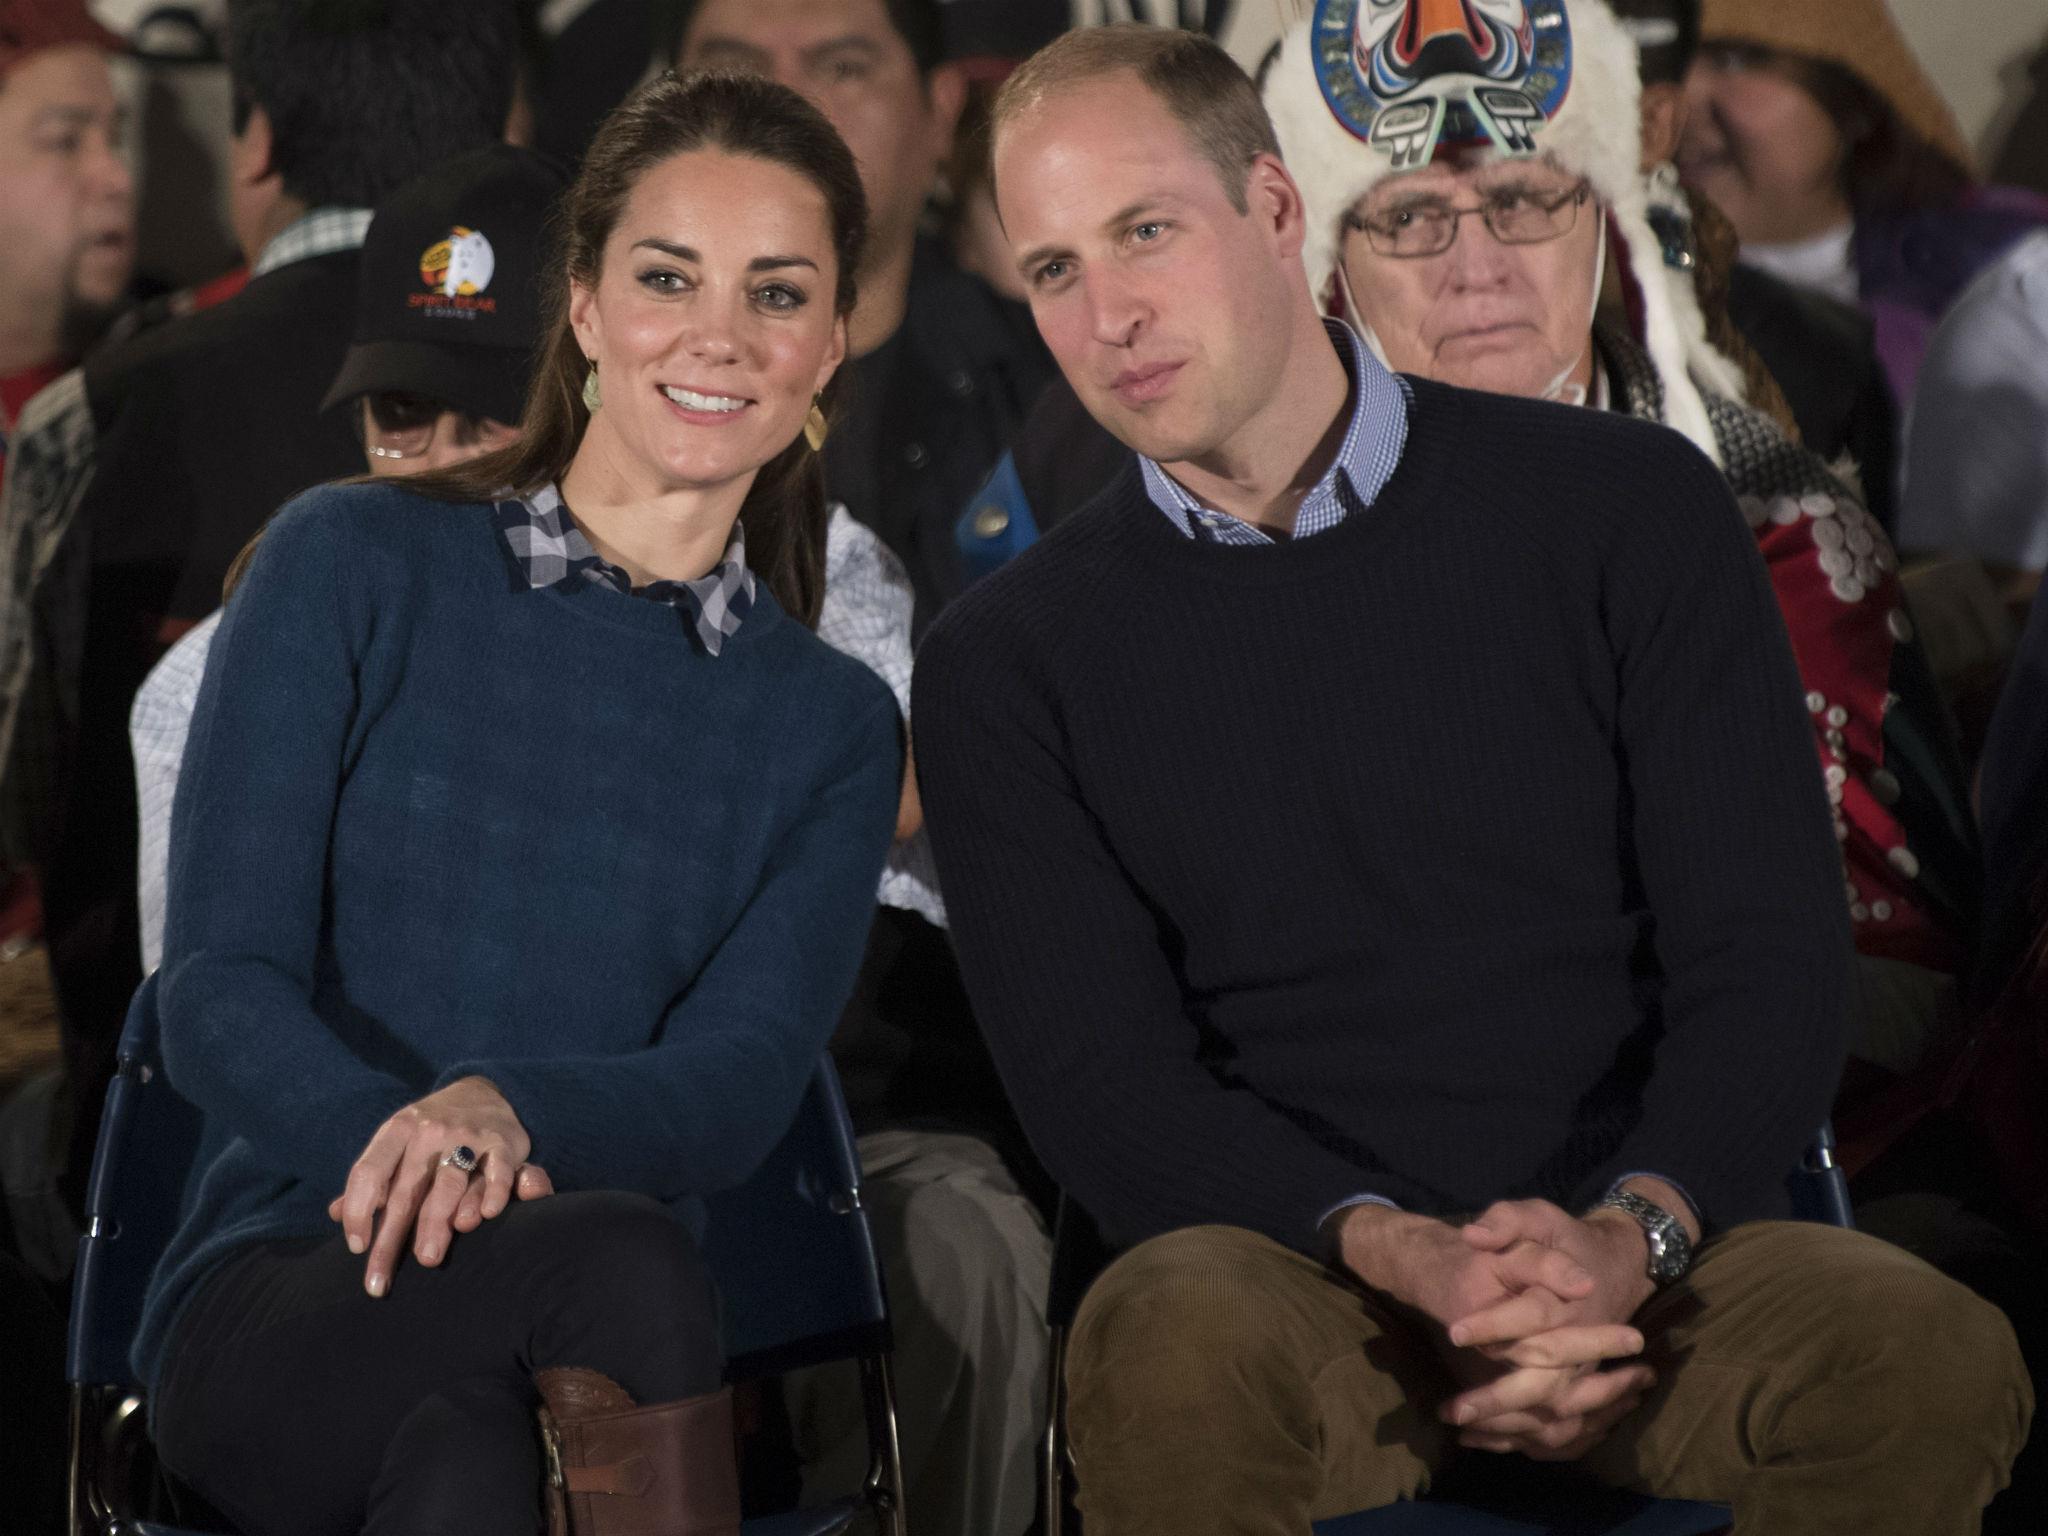 The Duchess and Duke of Cambridge visit first nation community members in Bella, Bella Canada